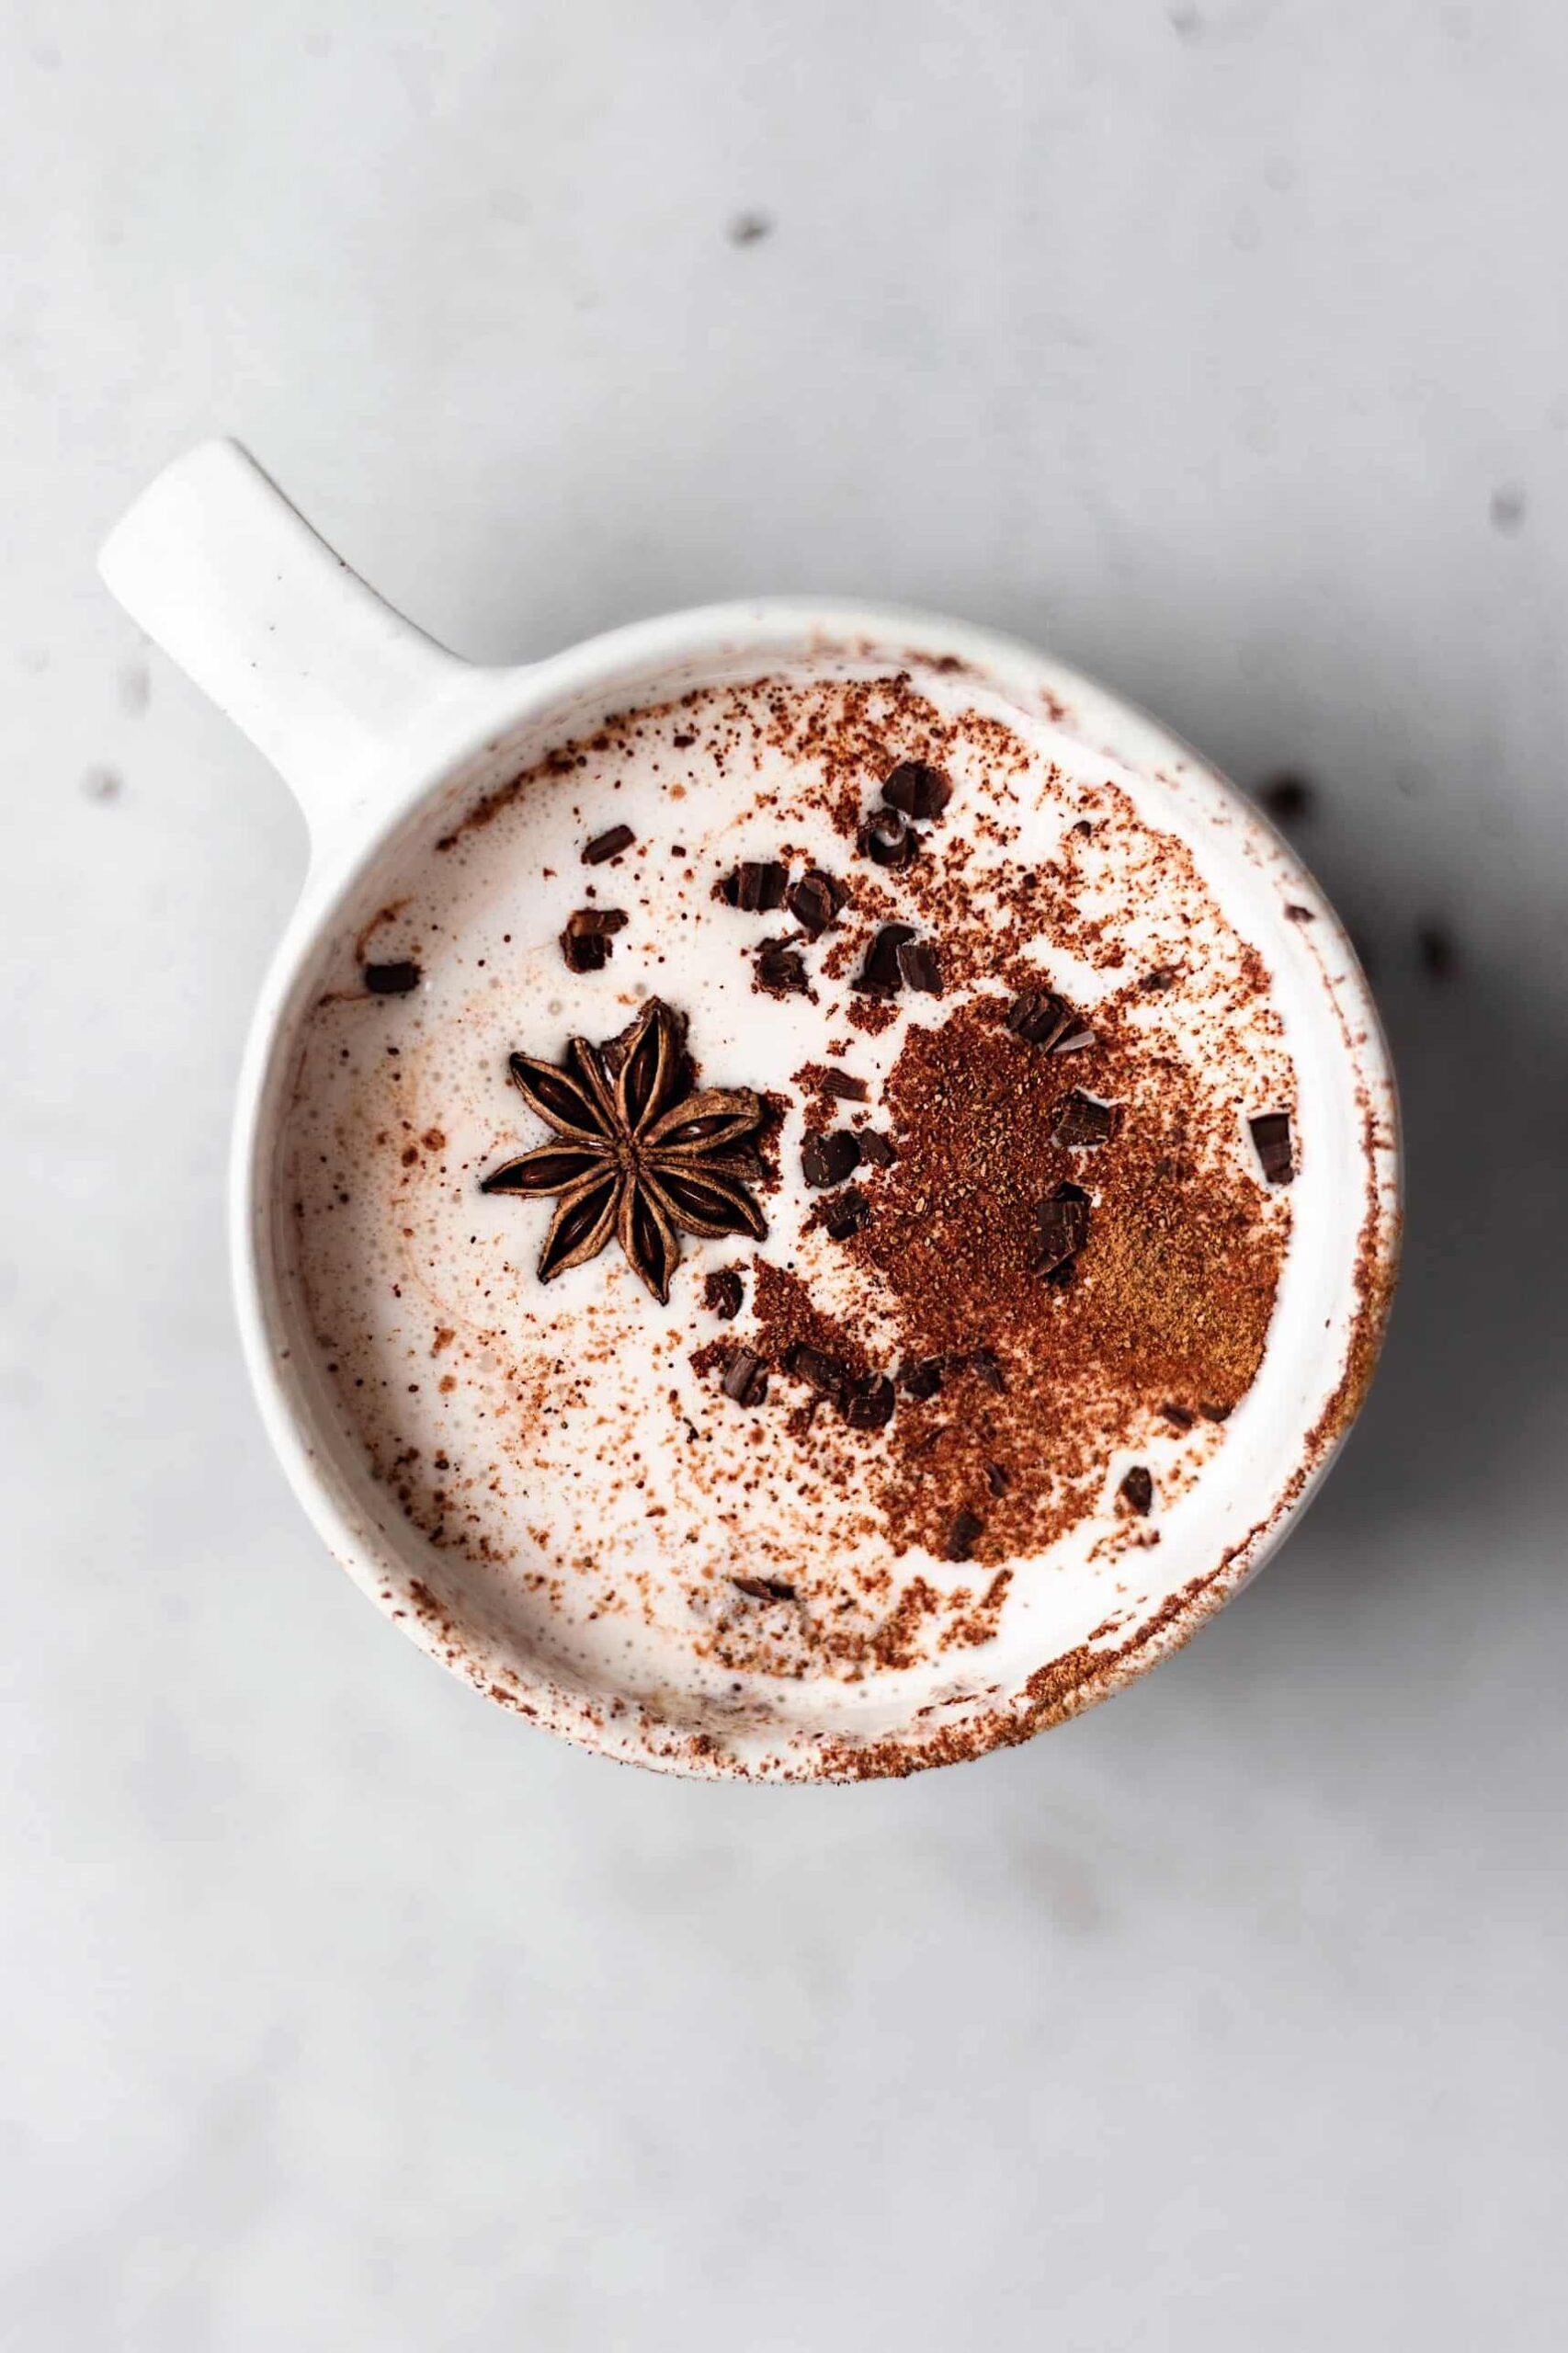  A heavenly concoction of chocolate and warmth that makes you feel cozy.